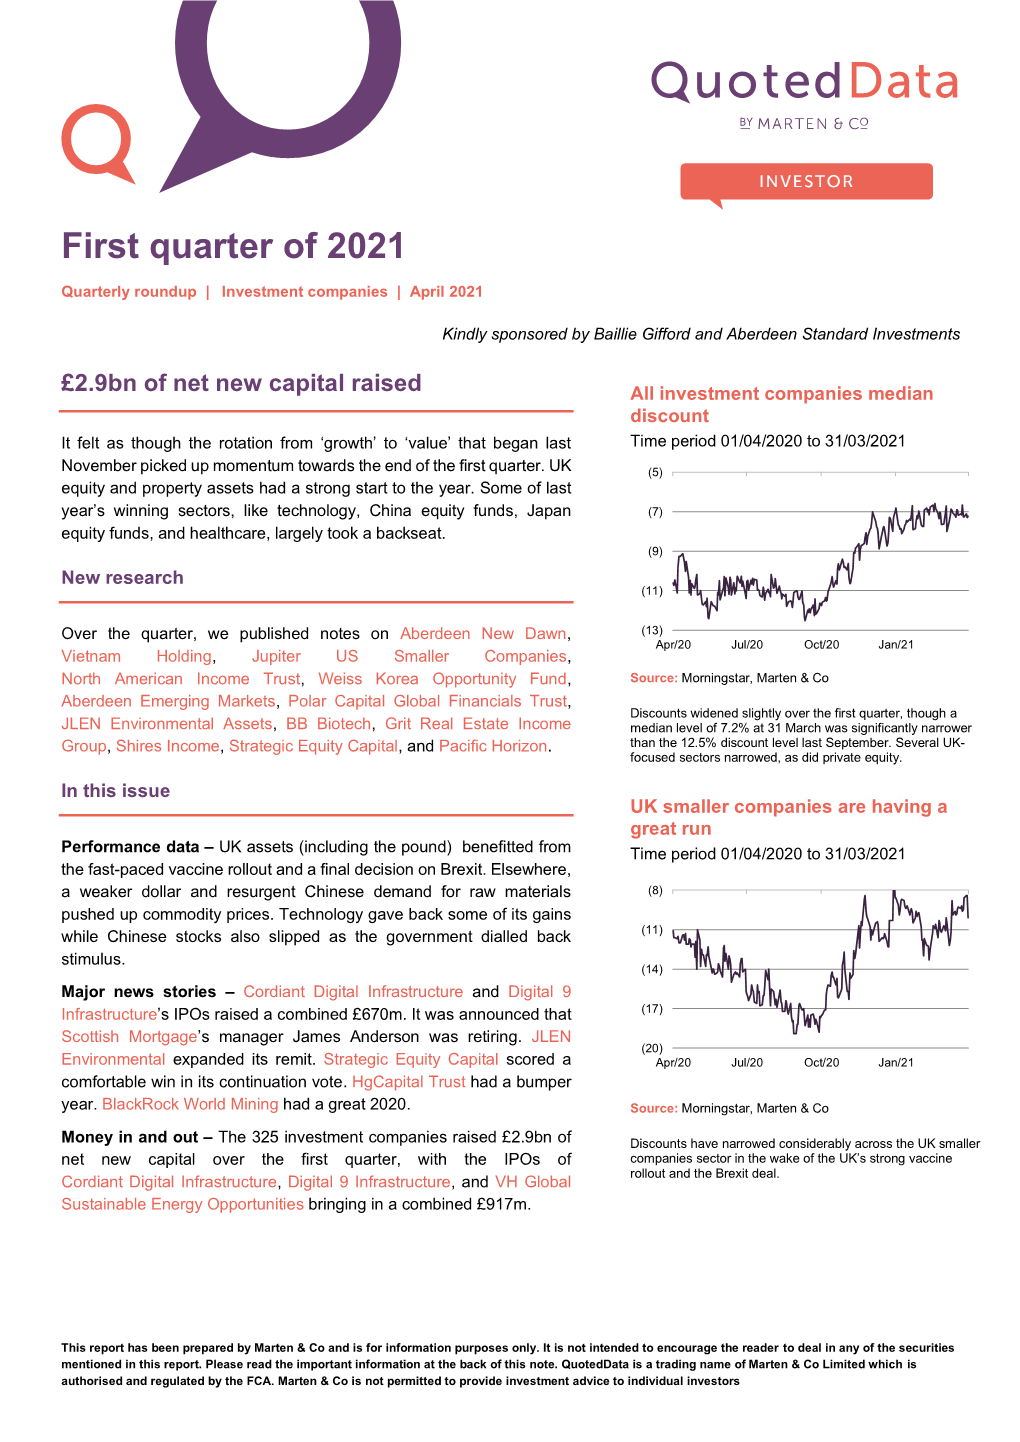 First Quarter 2021 Investment Companies Review